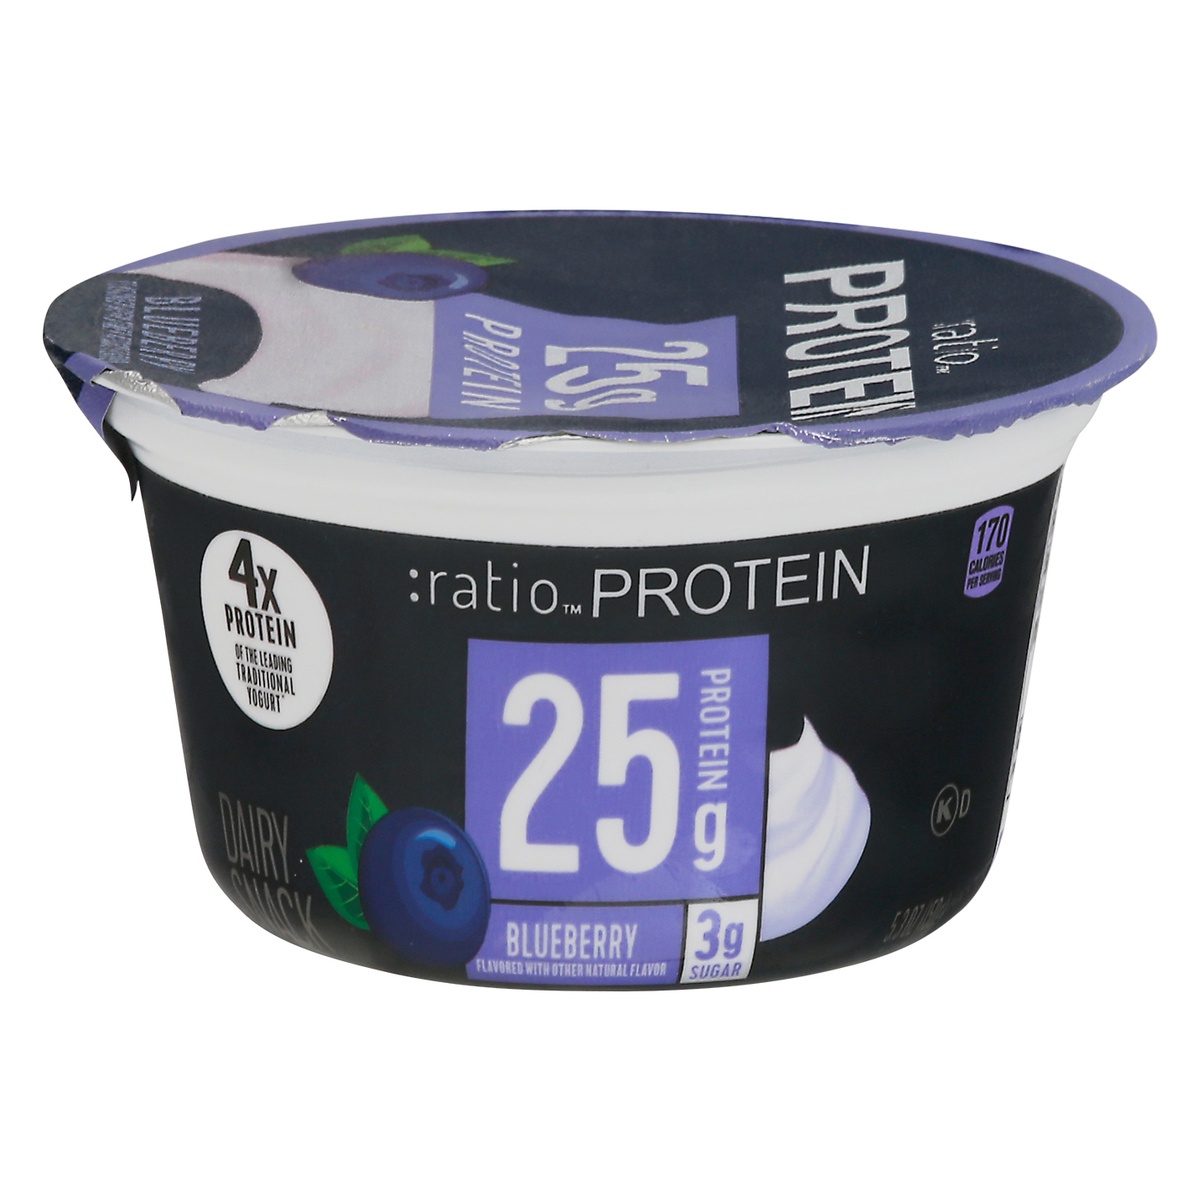 slide 1 of 1, :ratio Protein Blueberry Dairy Snack, 5.3 oz